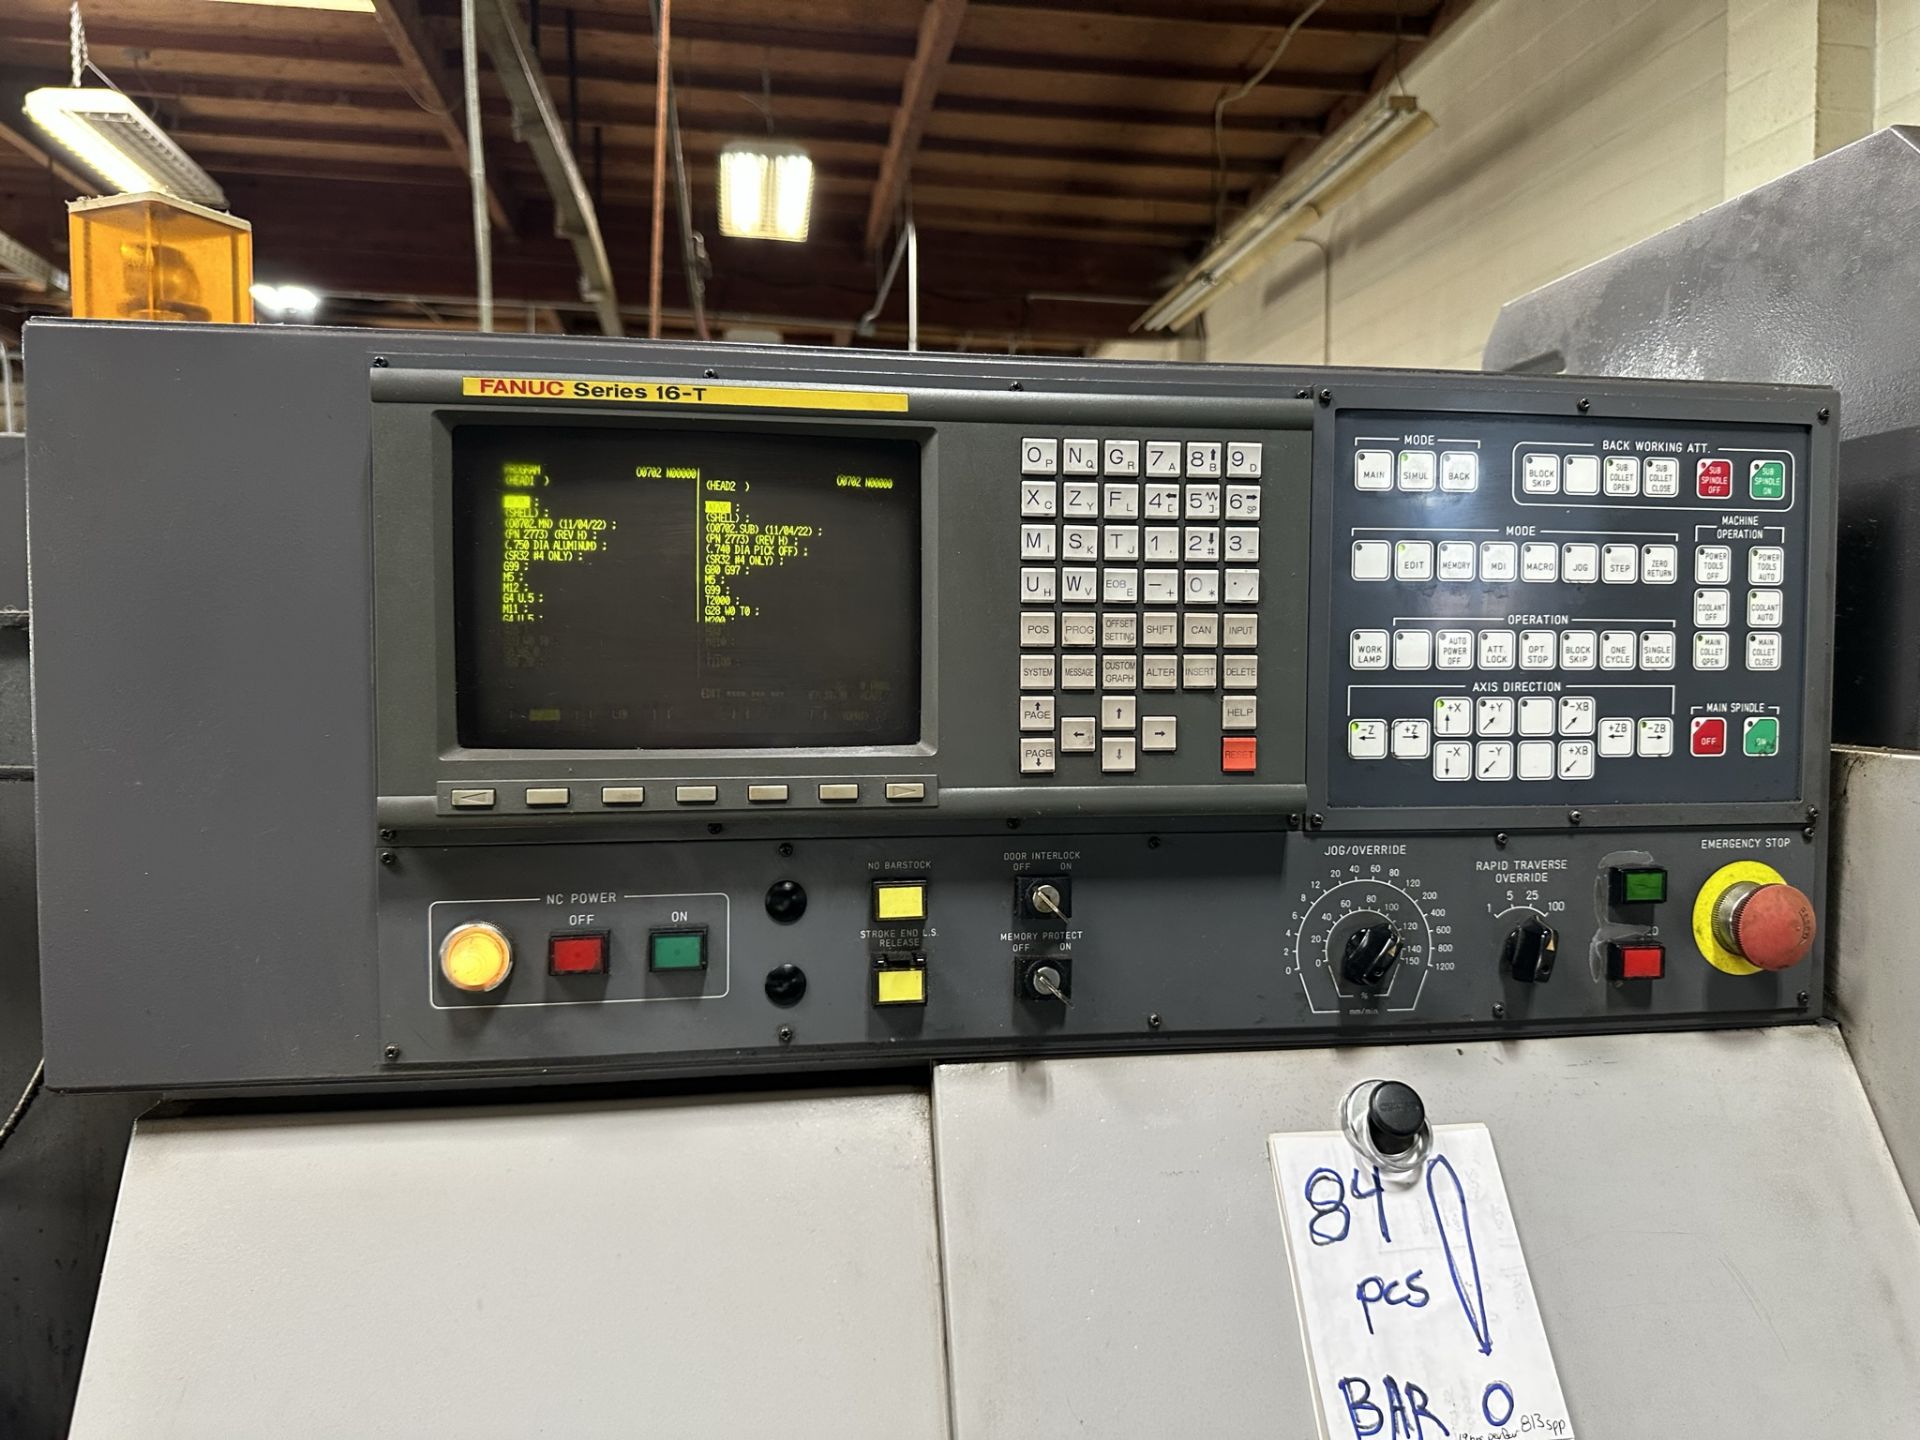 1999 STAR SR-32 SWISS LATHE, FANUC 16-T CONTROL, 32MM (1-1/4") MAIN/SUB SPINDLE, FULL C-AXIS, 7,000 - Image 6 of 23